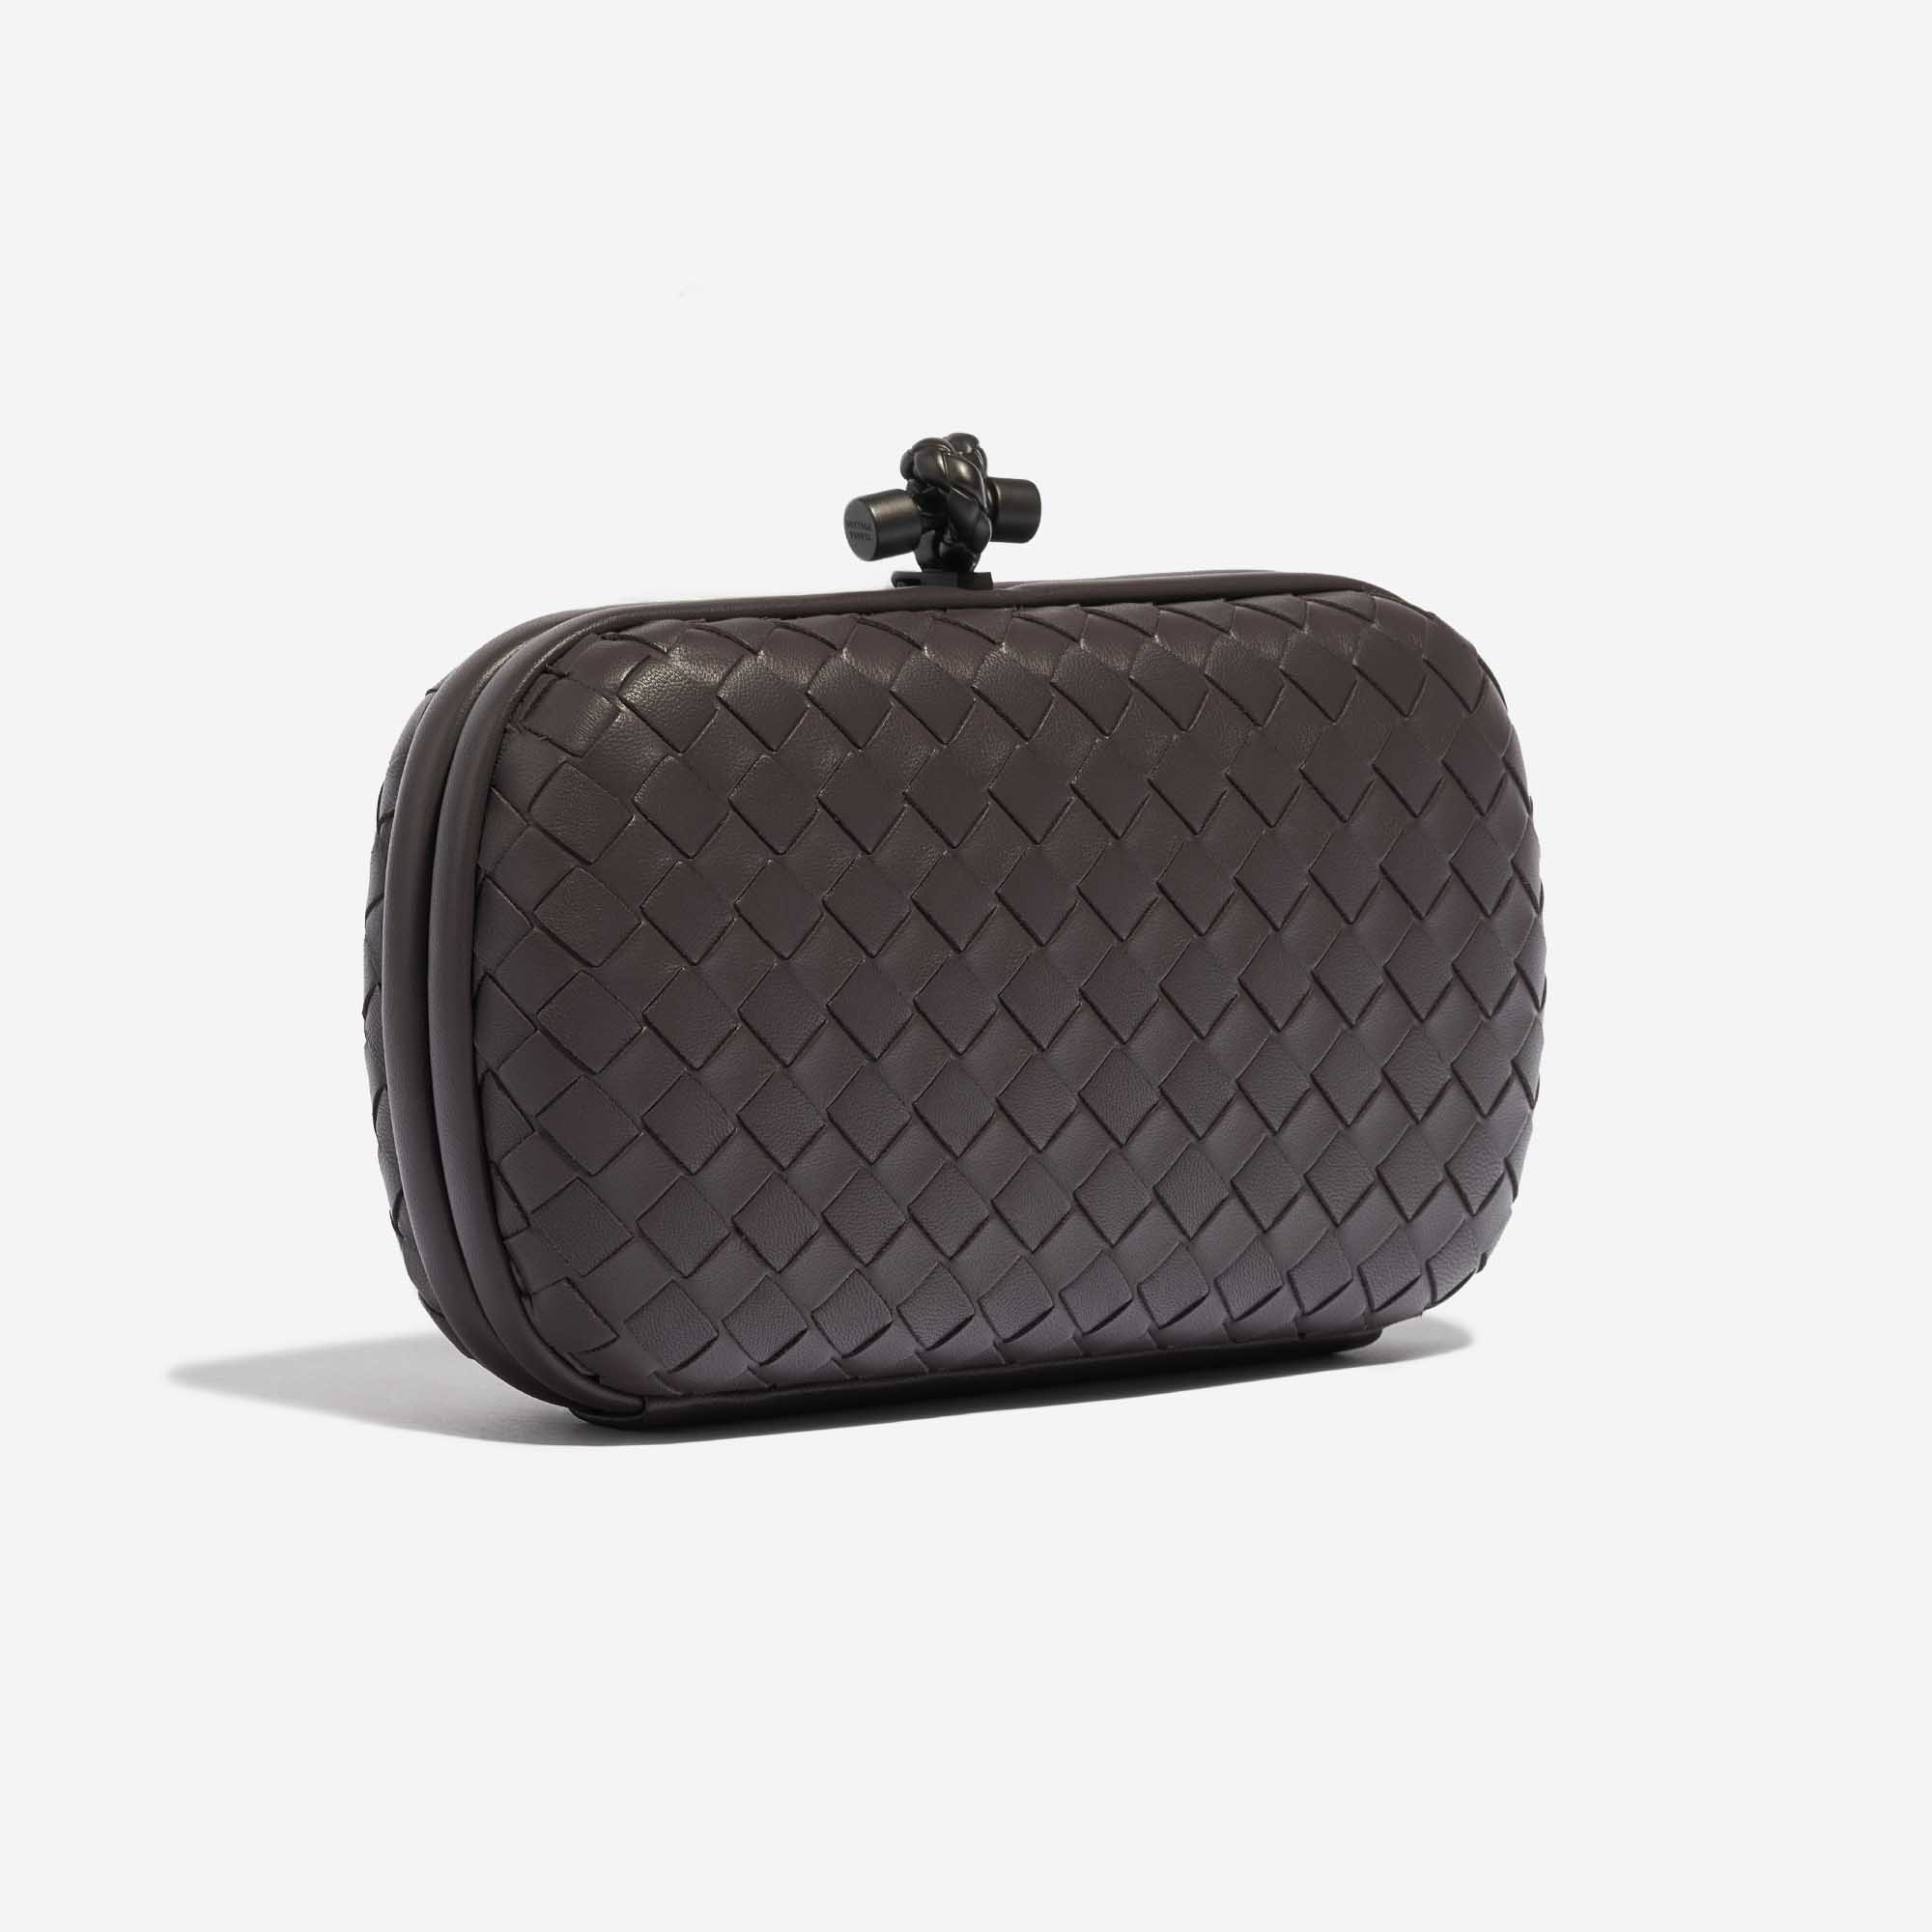 Pre-owned Bottega Veneta bag Knot Chain Clutch Nappa Quetsche Violet Side Front | Sell your designer bag on Saclab.com